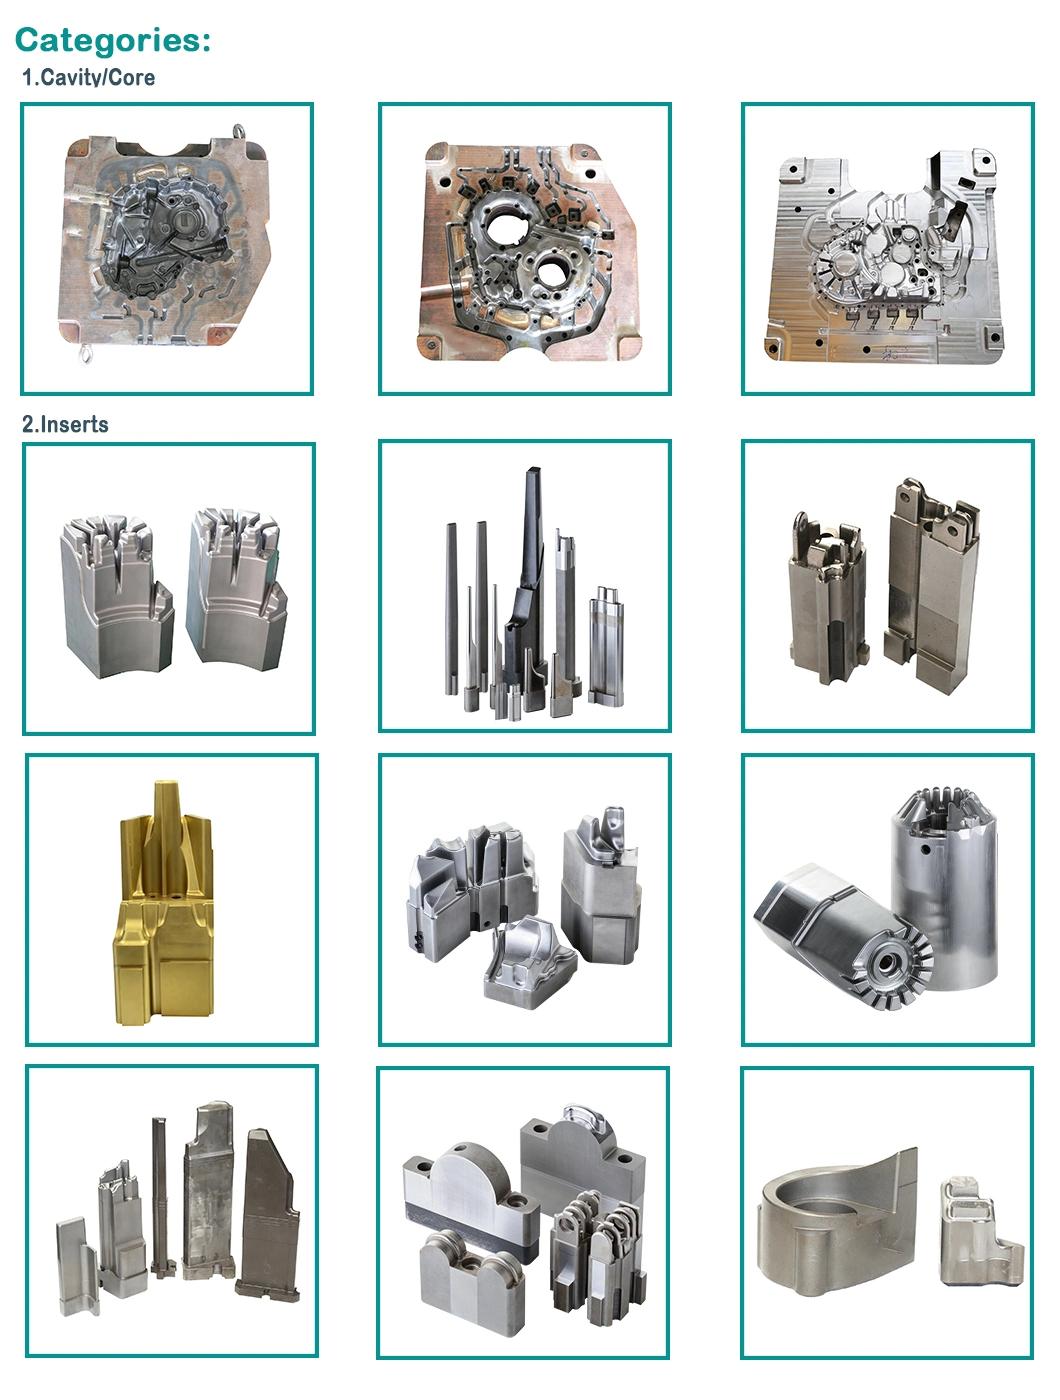 High Precision Strict Tolerance Plastic Injection Mould Parts Die Casting Die Components Die Casting Mould Parts Core Pin Inserts Vent Chill Water Jacket